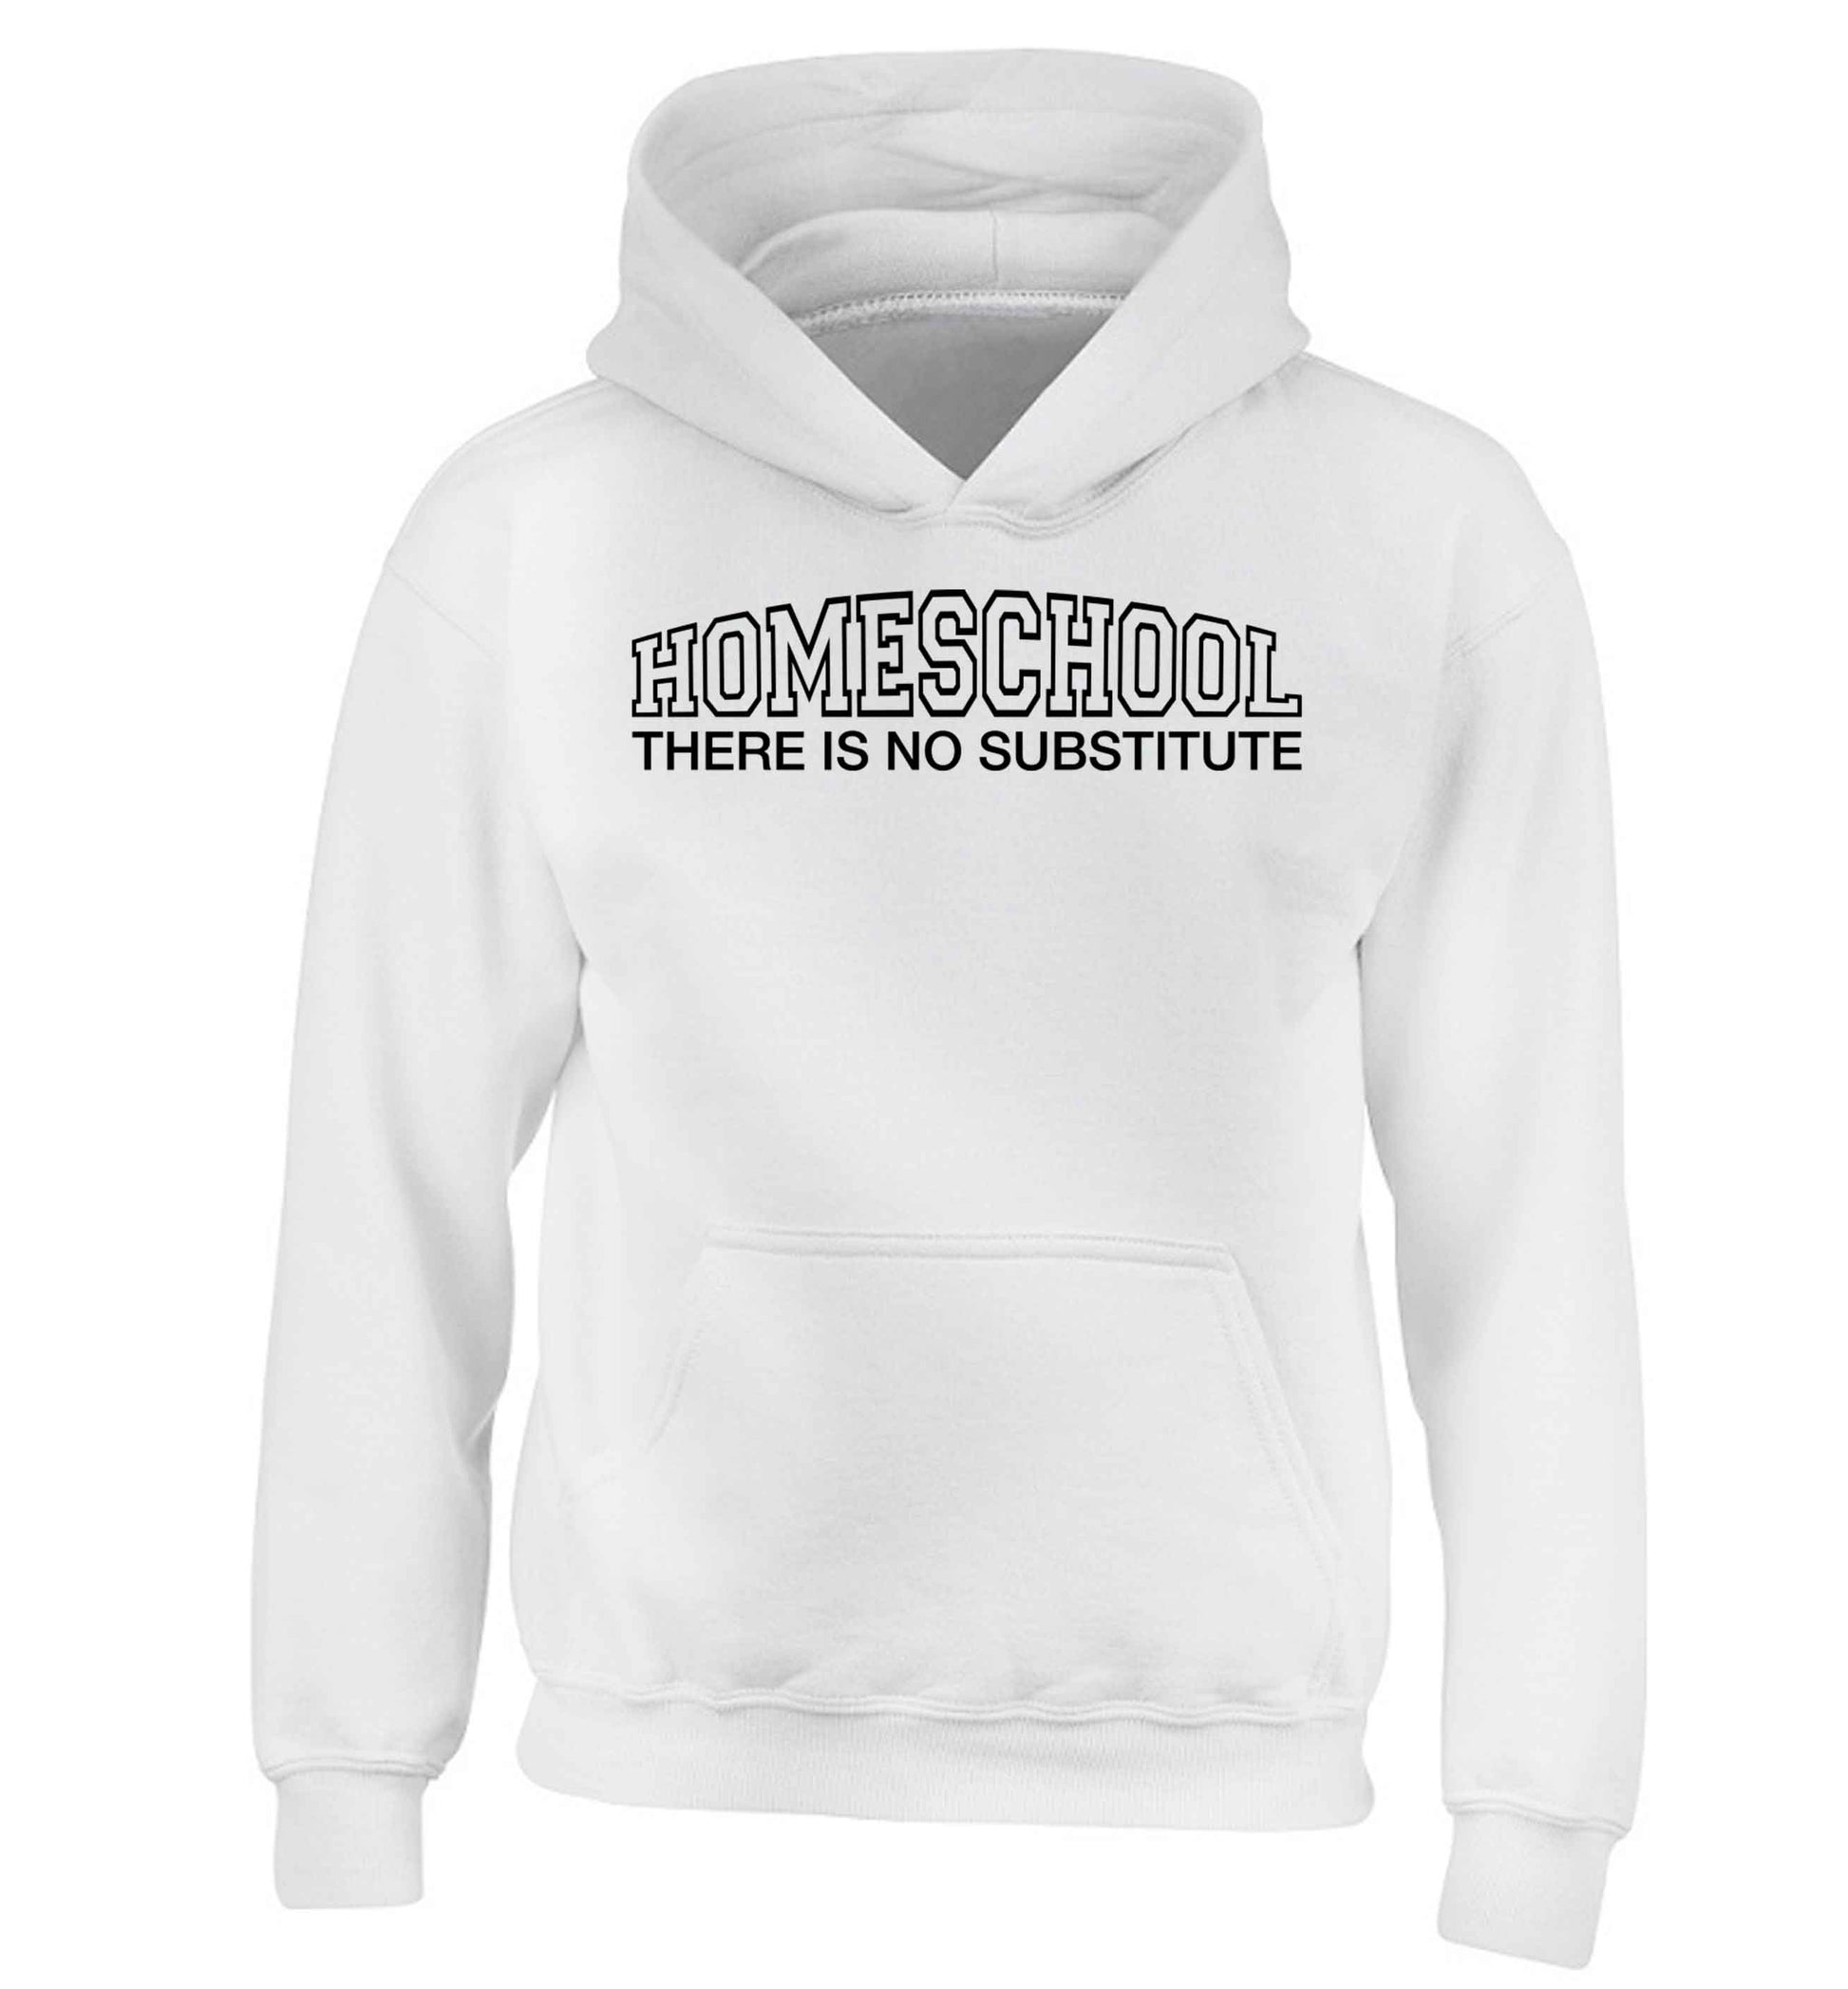 Homeschool there is not substitute children's white hoodie 12-13 Years